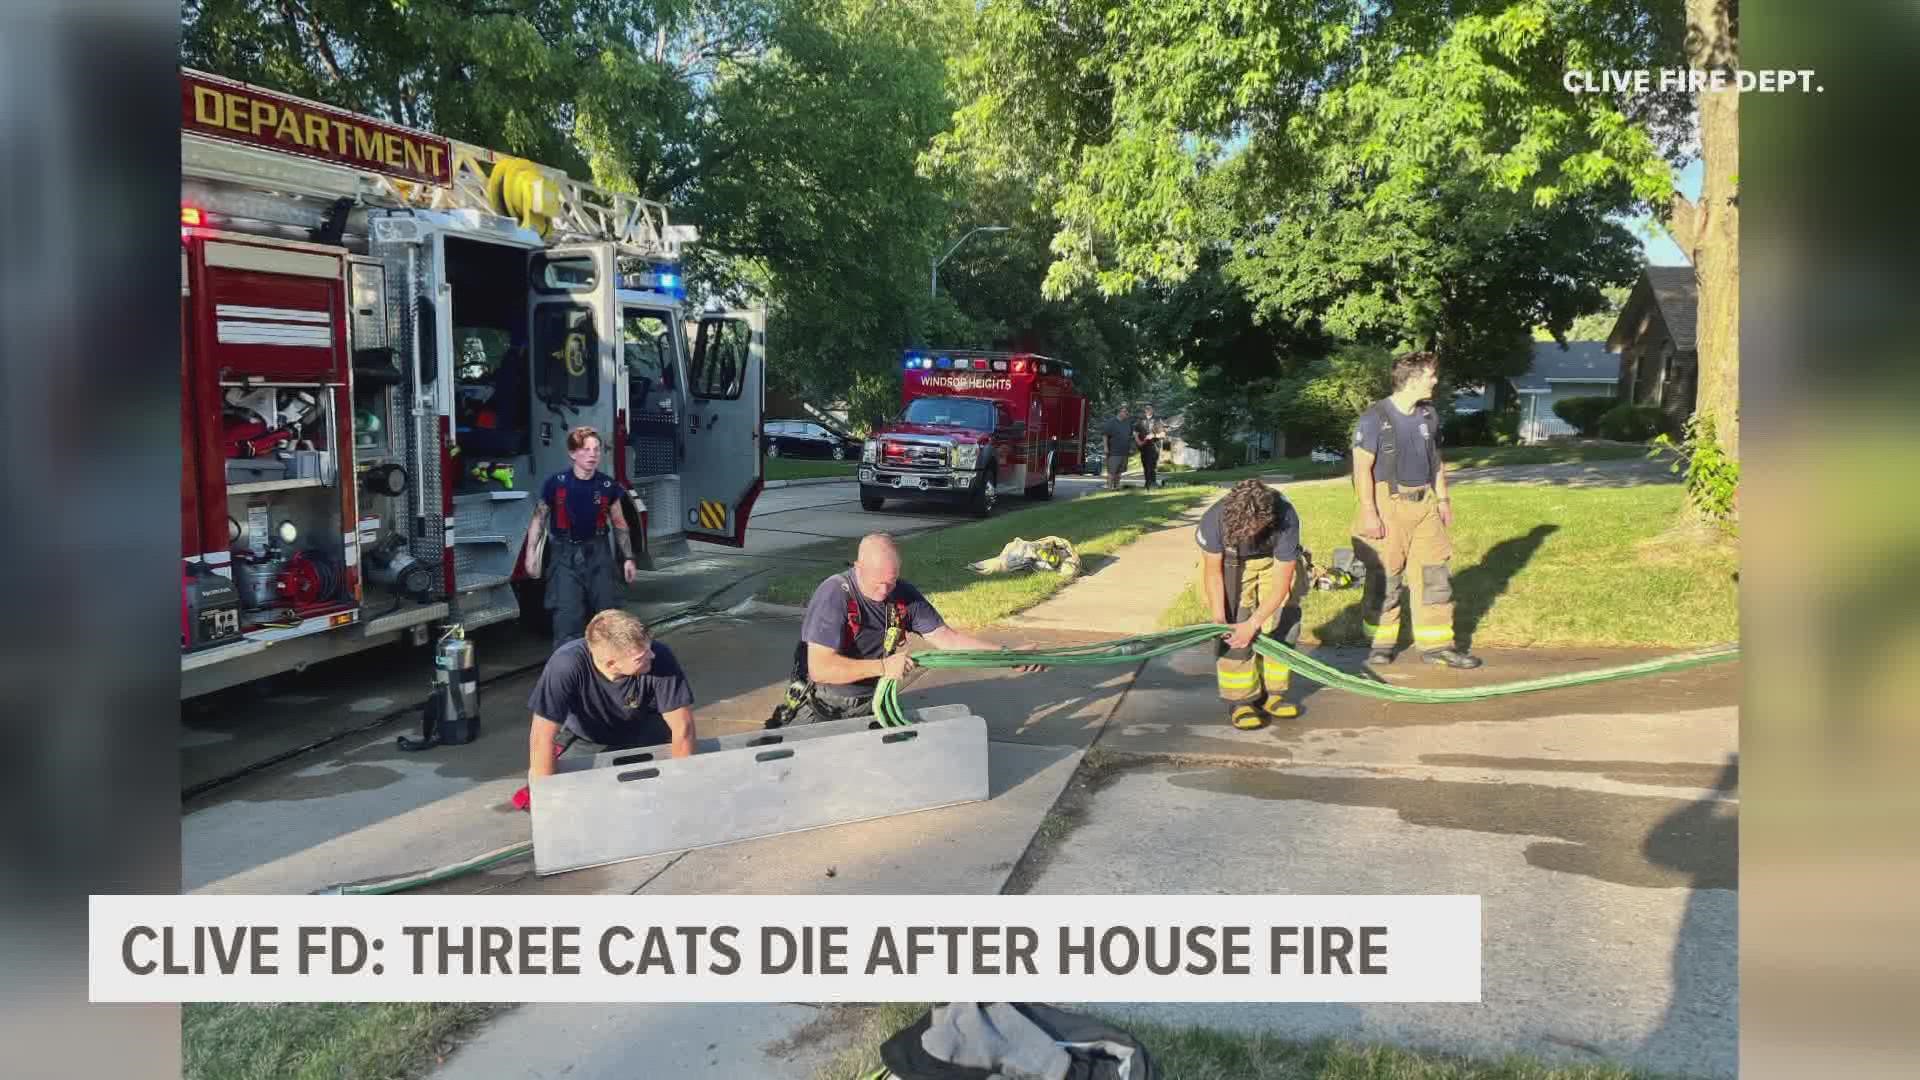 The Clive Fire Department responded around 6 p.m. Tuesday to the incident, which consumed the kitchen and caused extensive smoke damage on the main floor.